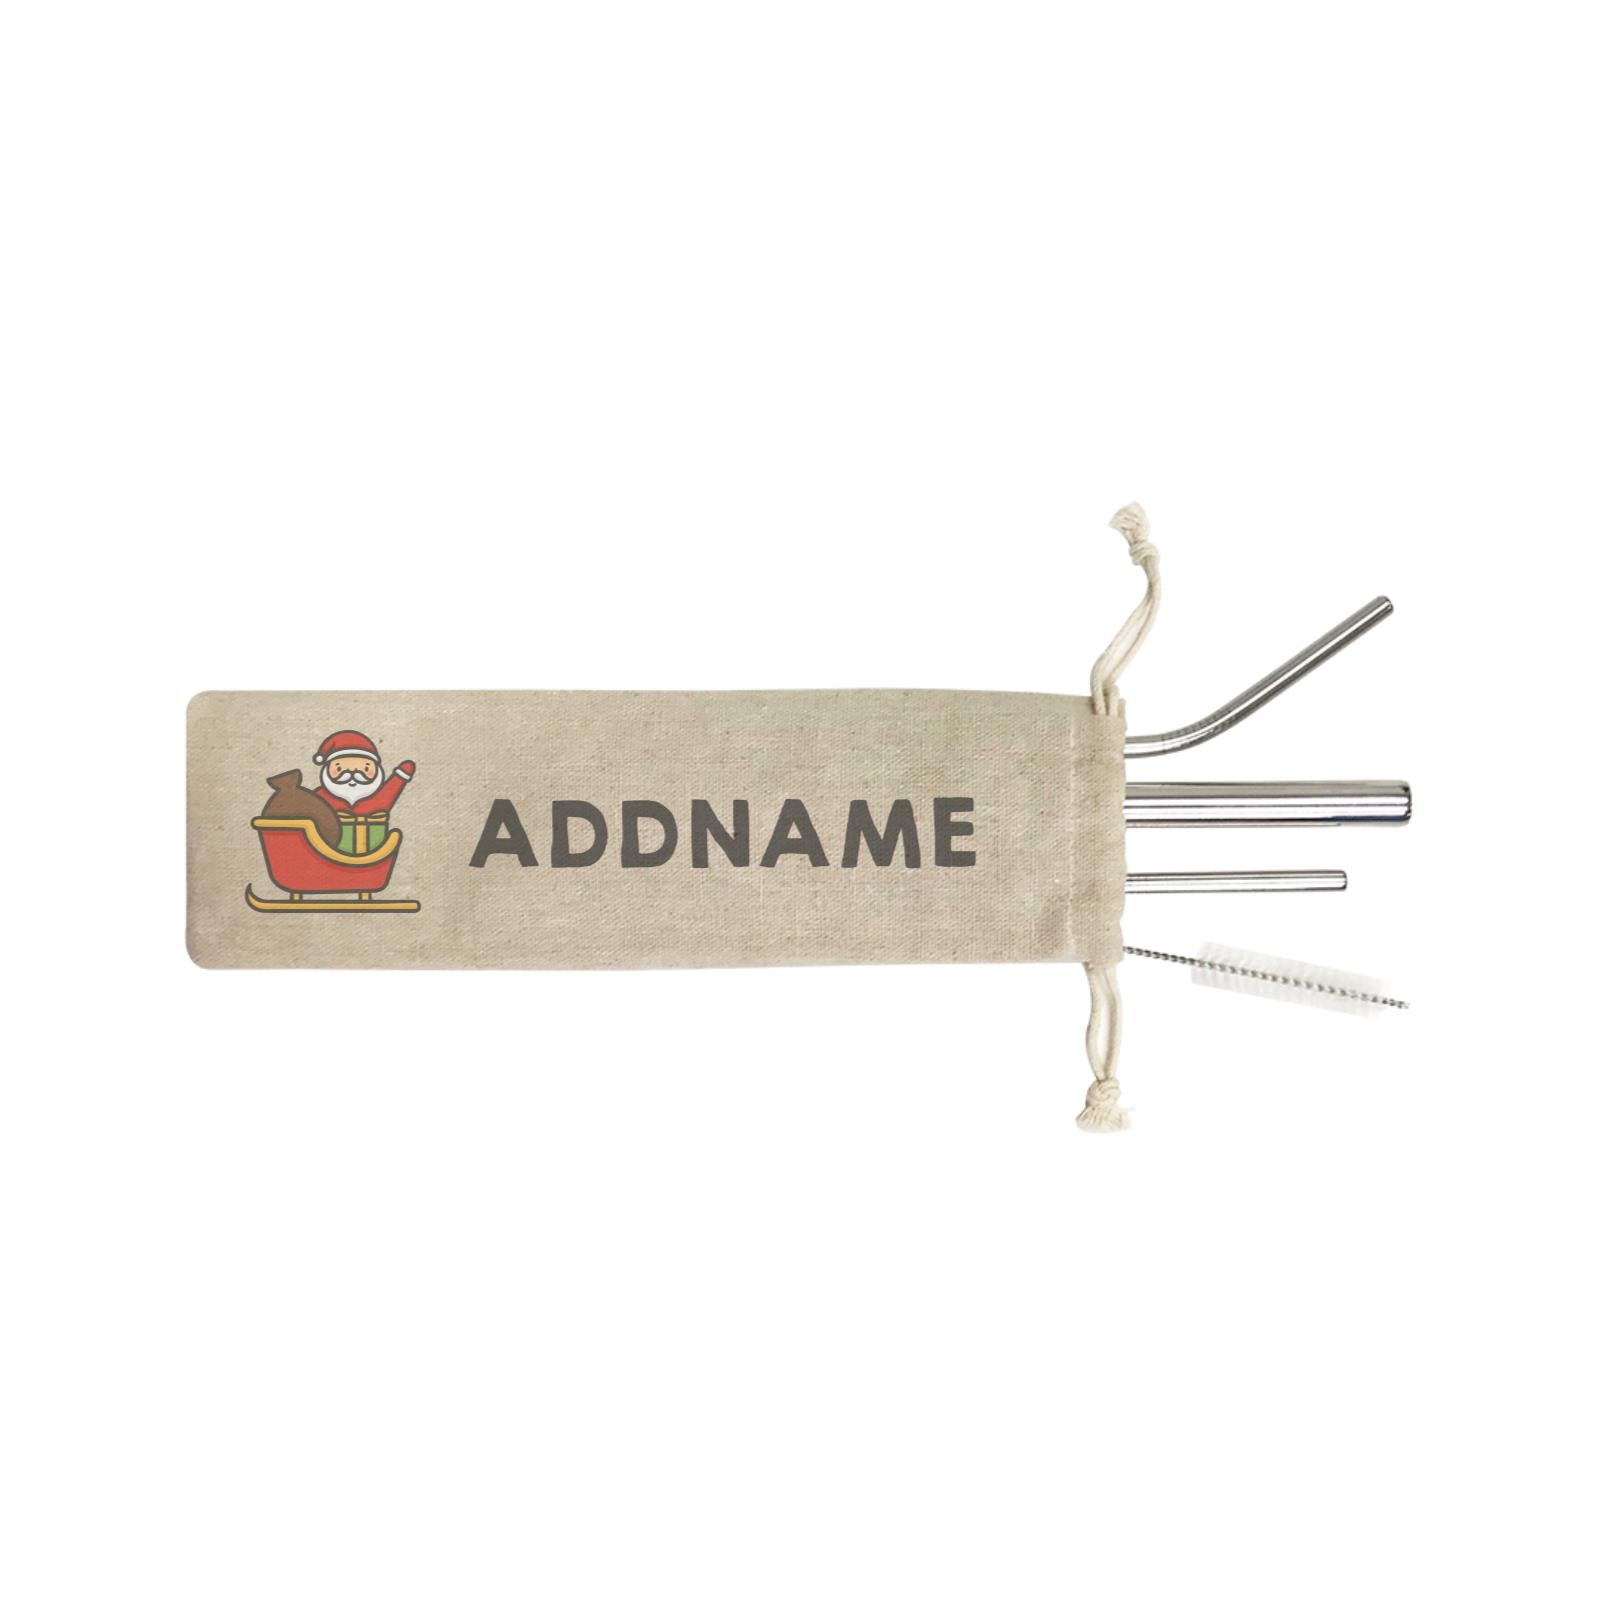 Xmas Cute Santa Addname SB 4-in-1 Stainless Steel Straw Set In a Satchel